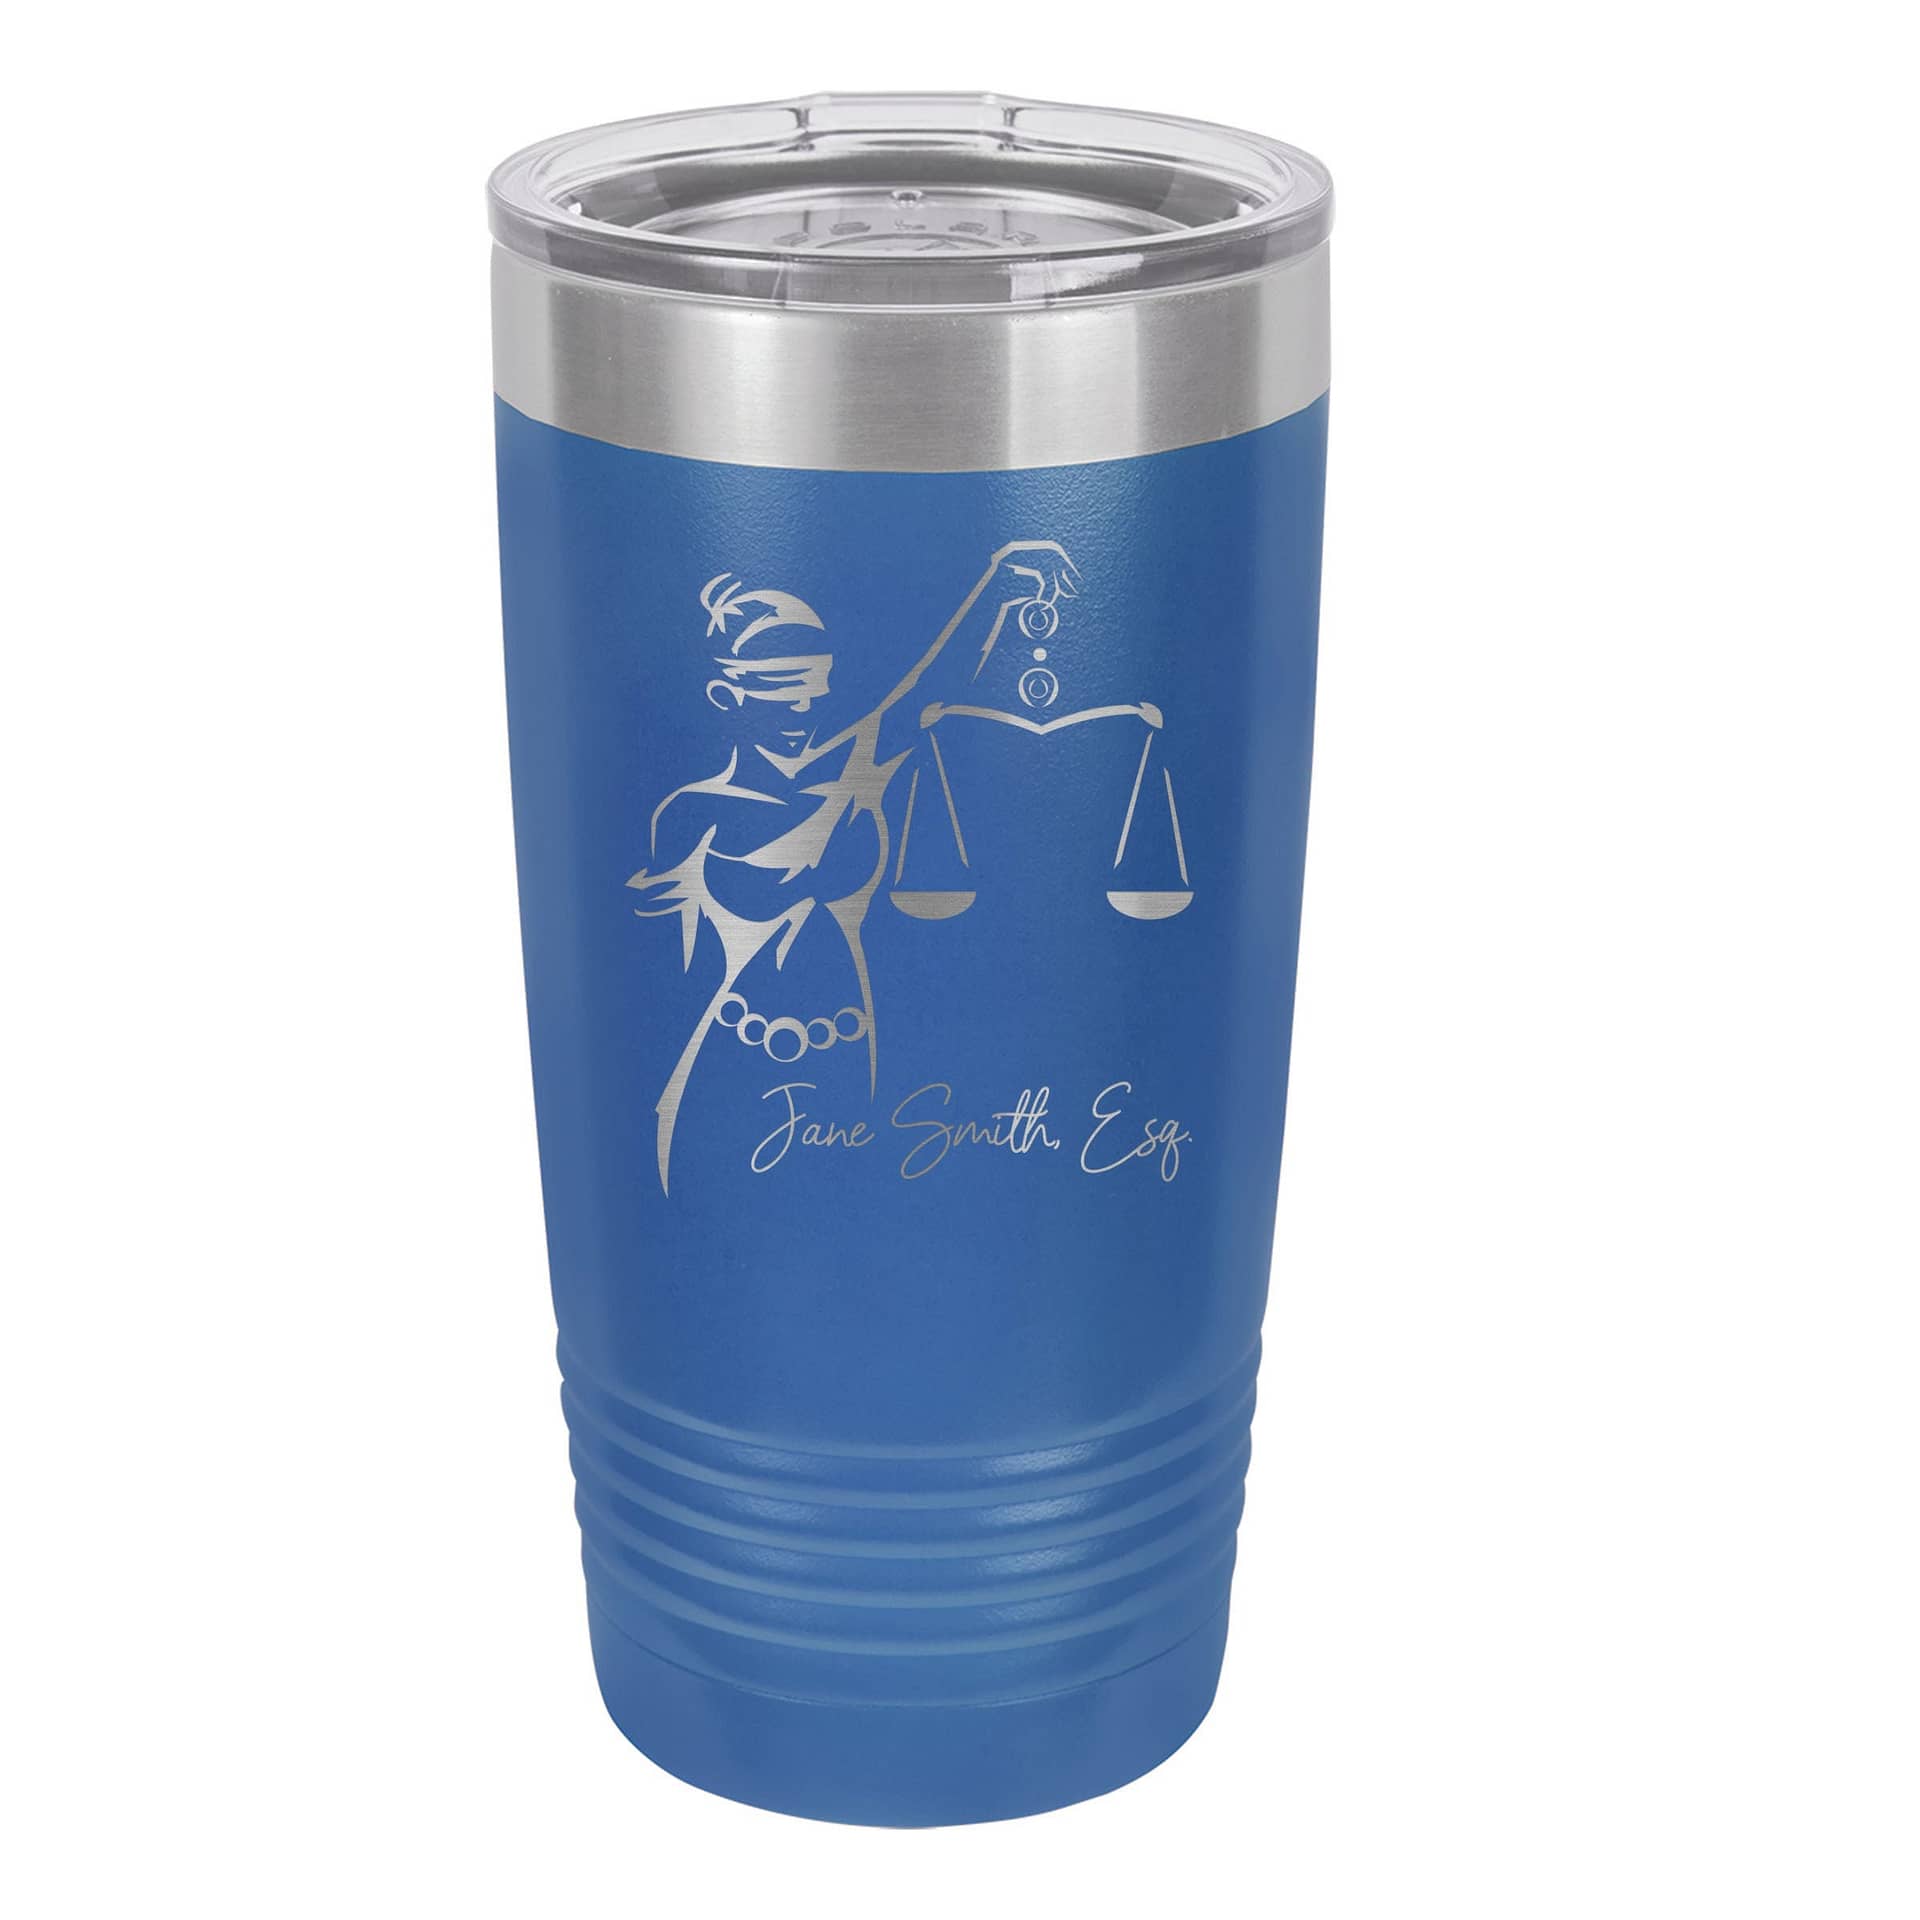 Mortar and Pestle - Engraved Personalized Pharmacist Tumbler With Name,  Stainless Cup, Pharmacist Gift